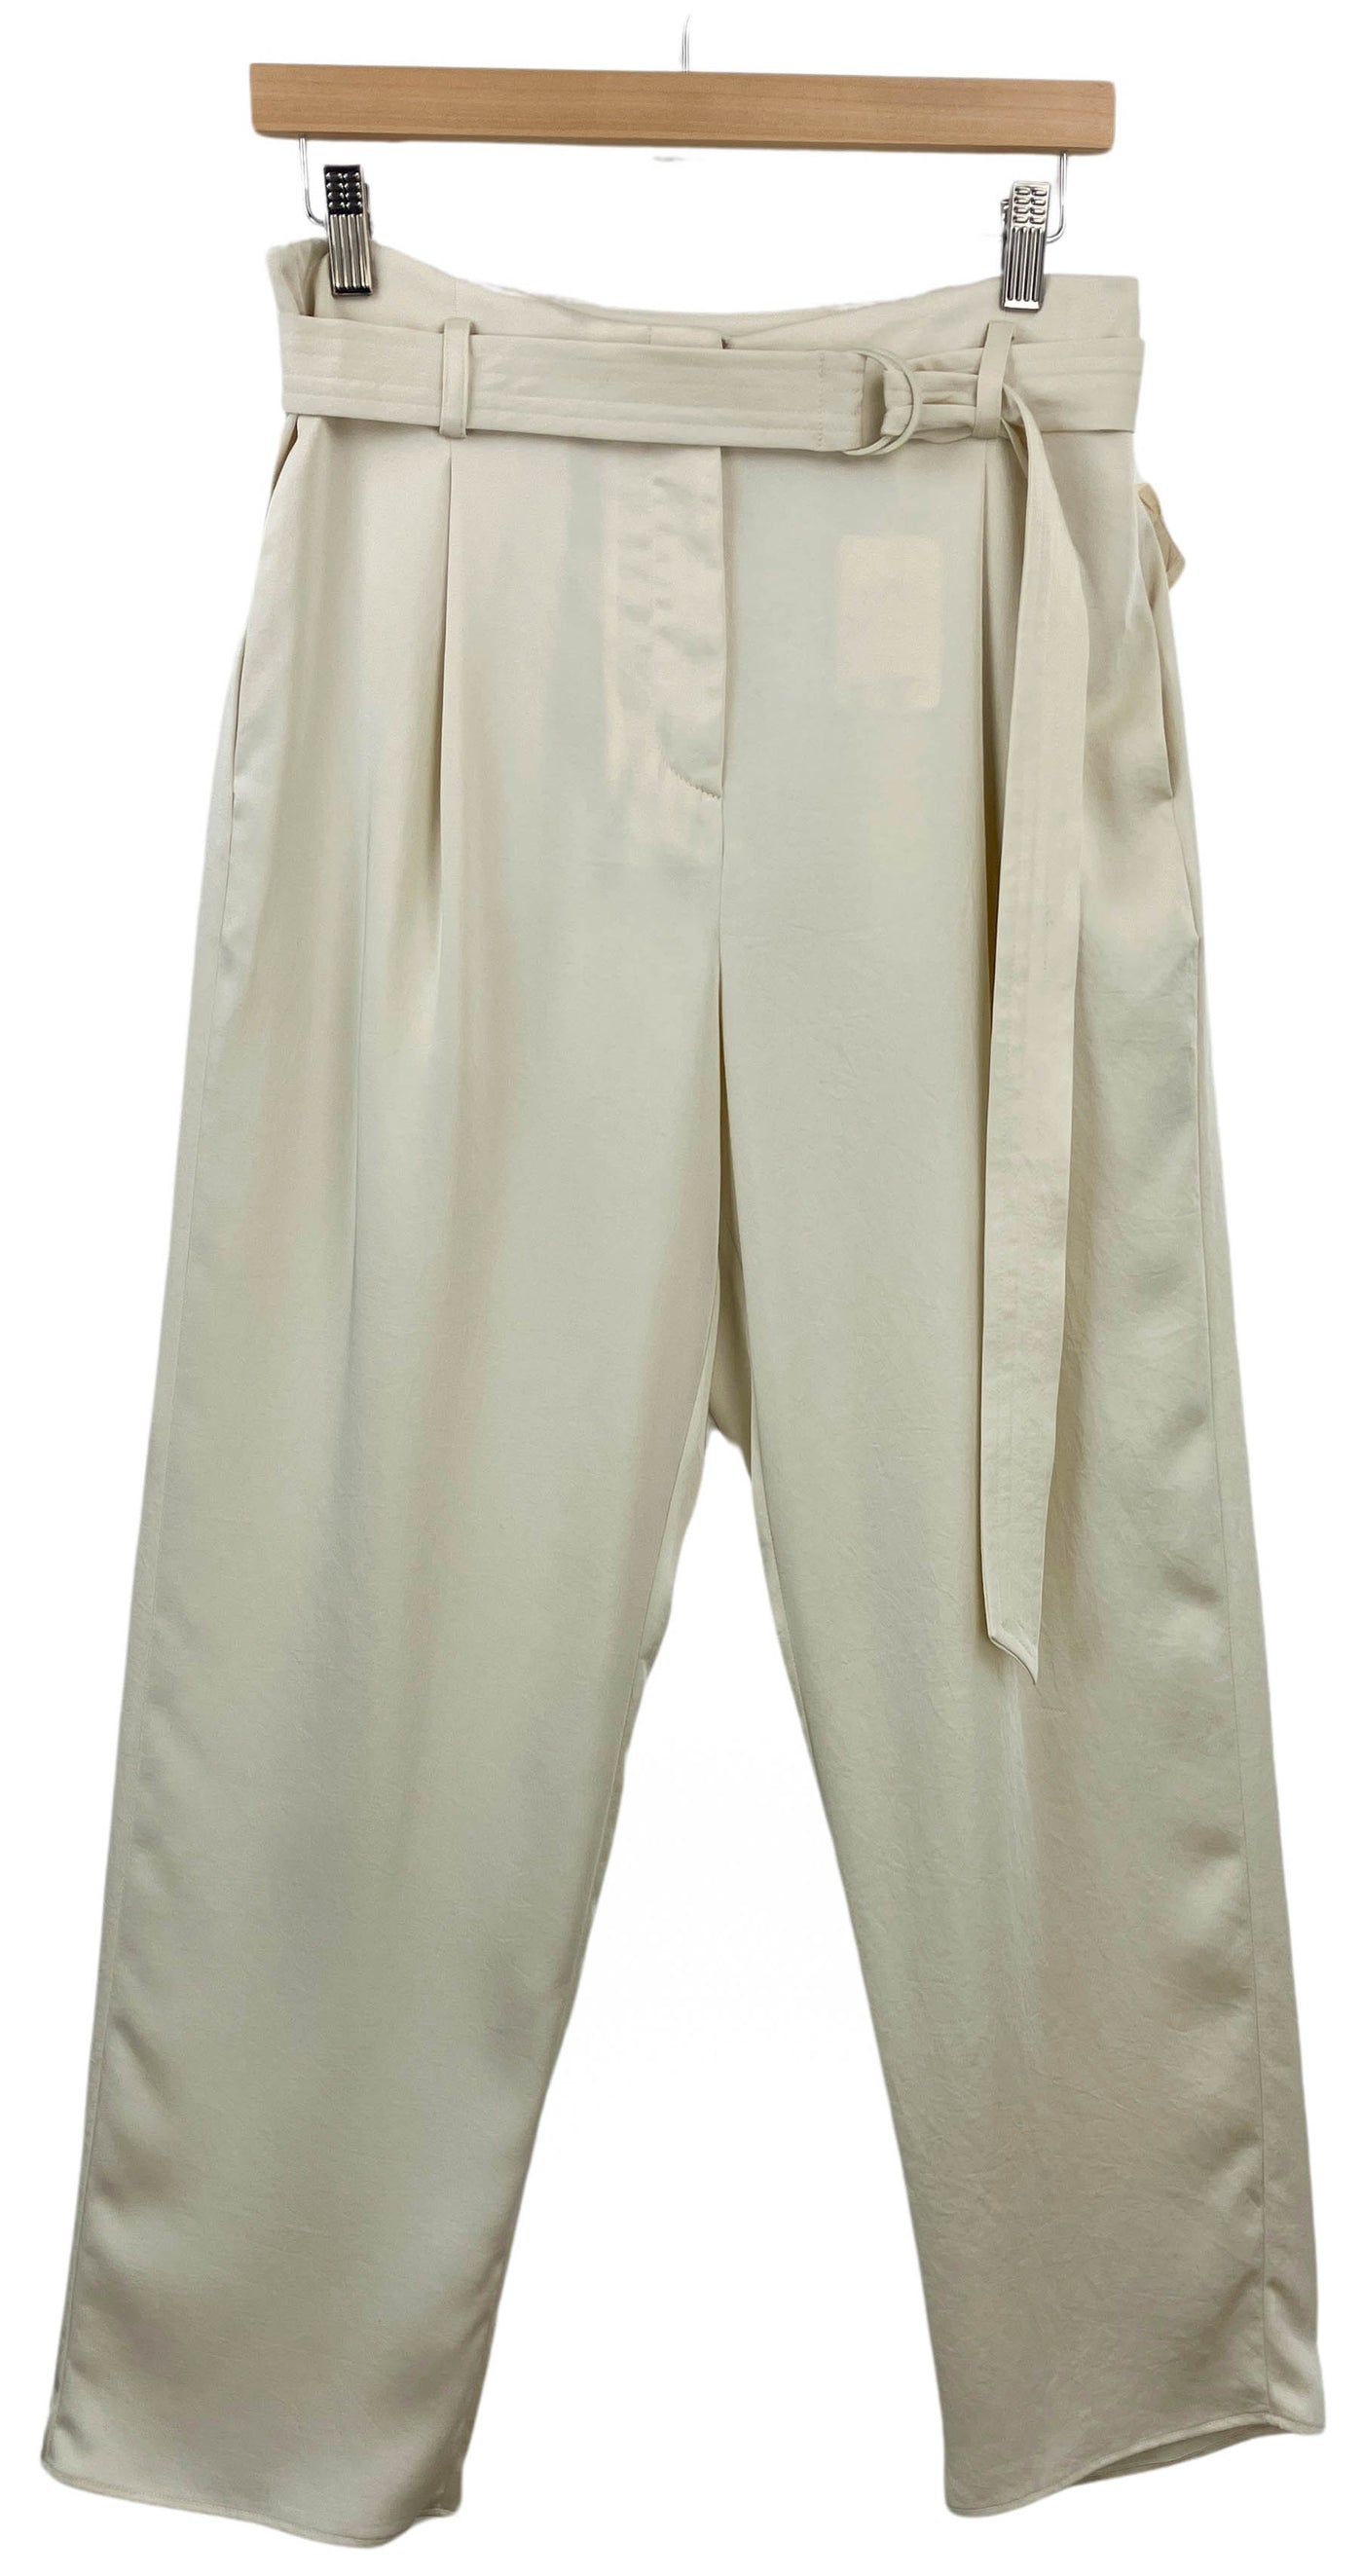 LAPOINTE Cropped Belted Trousers in Cream - Discounts on LAPOINTE at UAL